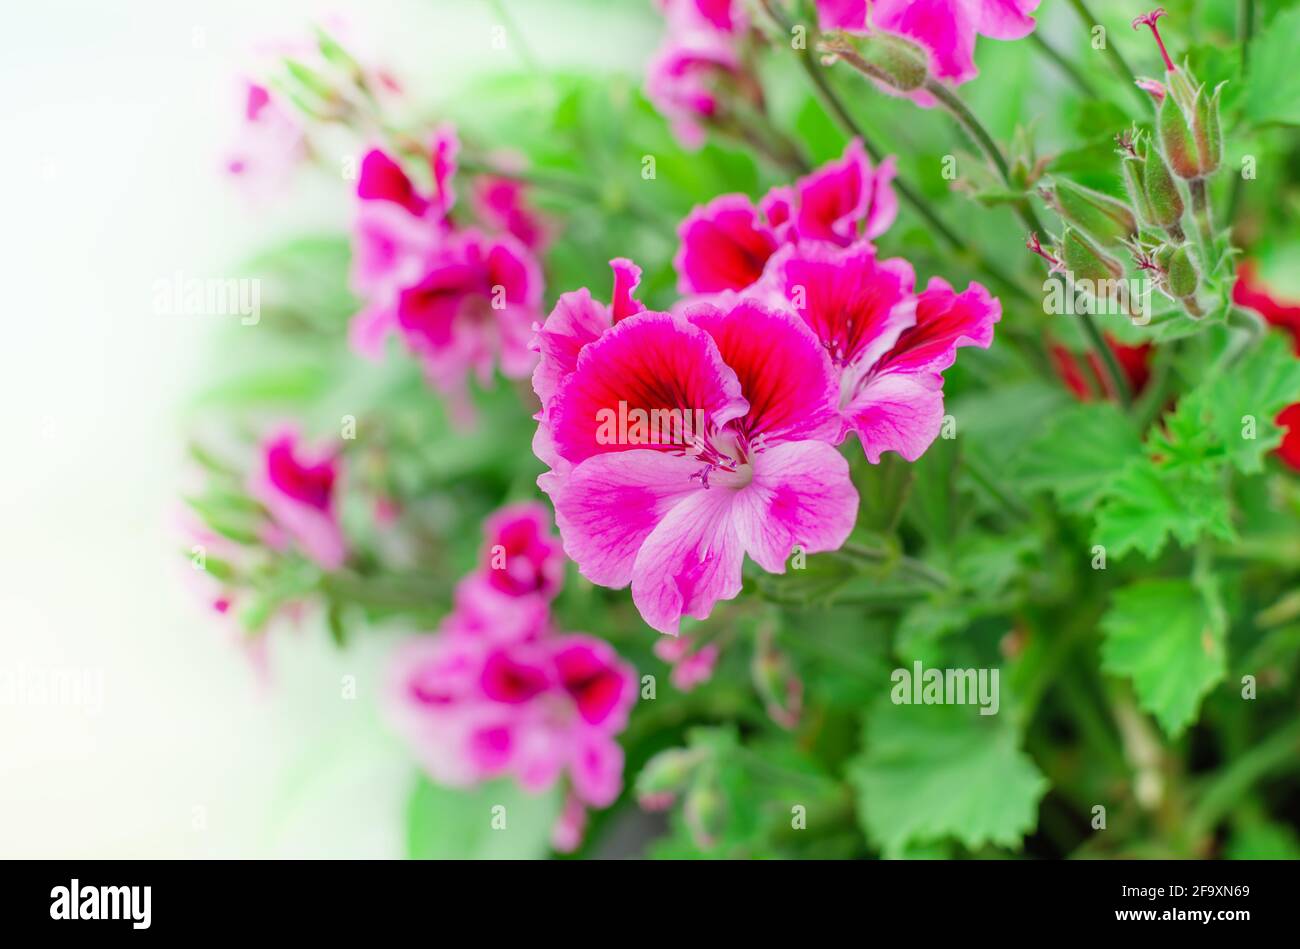 geranium plant with flowers and limtyas on a light background Stock Photo